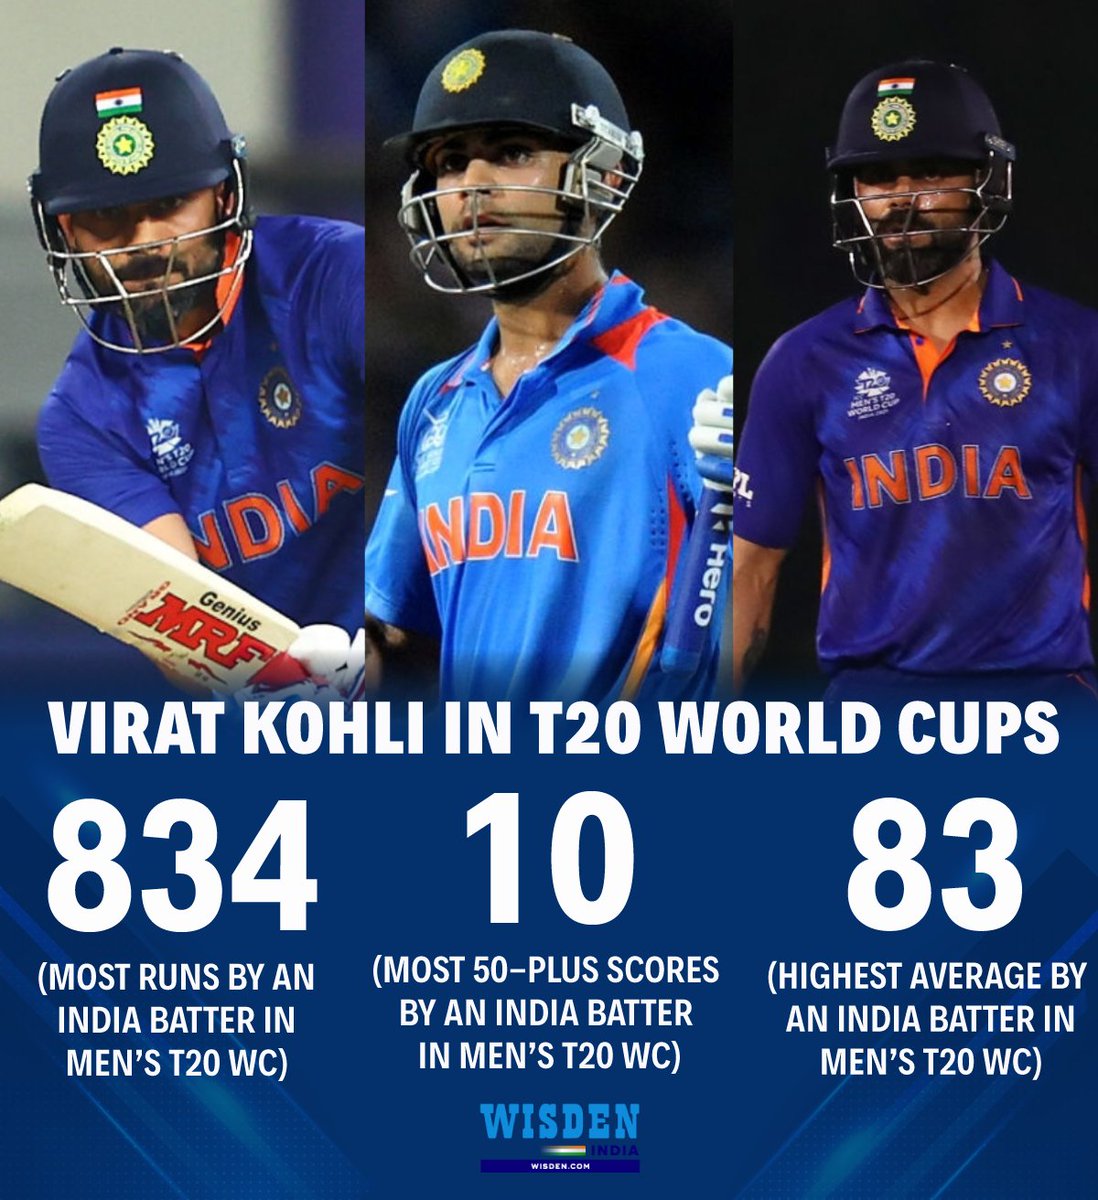 Virat Kohli - One of the greatest white-ball batters there has ever been.